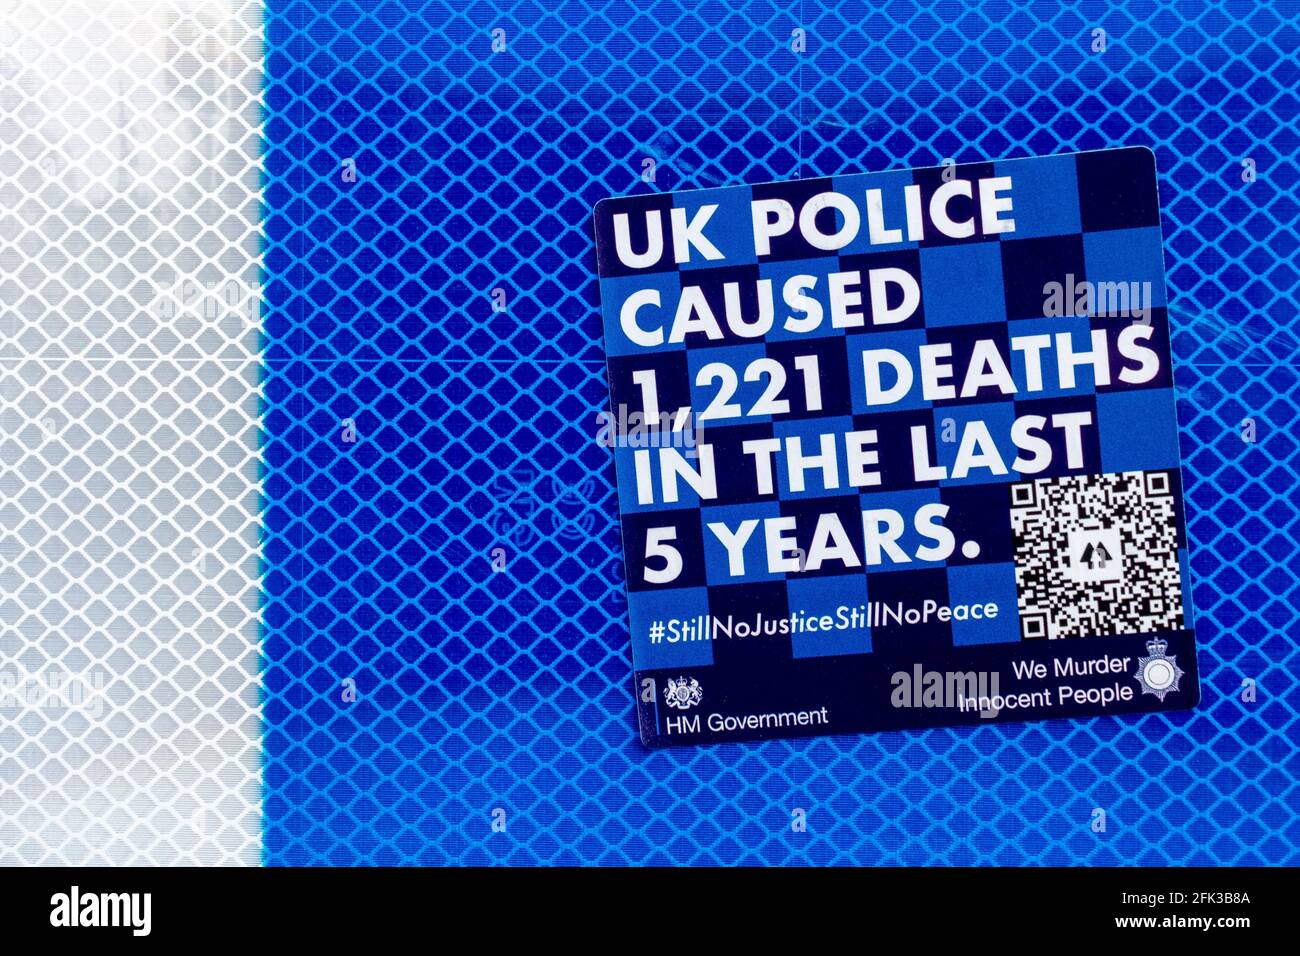 A blue anti-police sticker claiming the UK police caused 1221 deaths in the last five years. Stock Photo